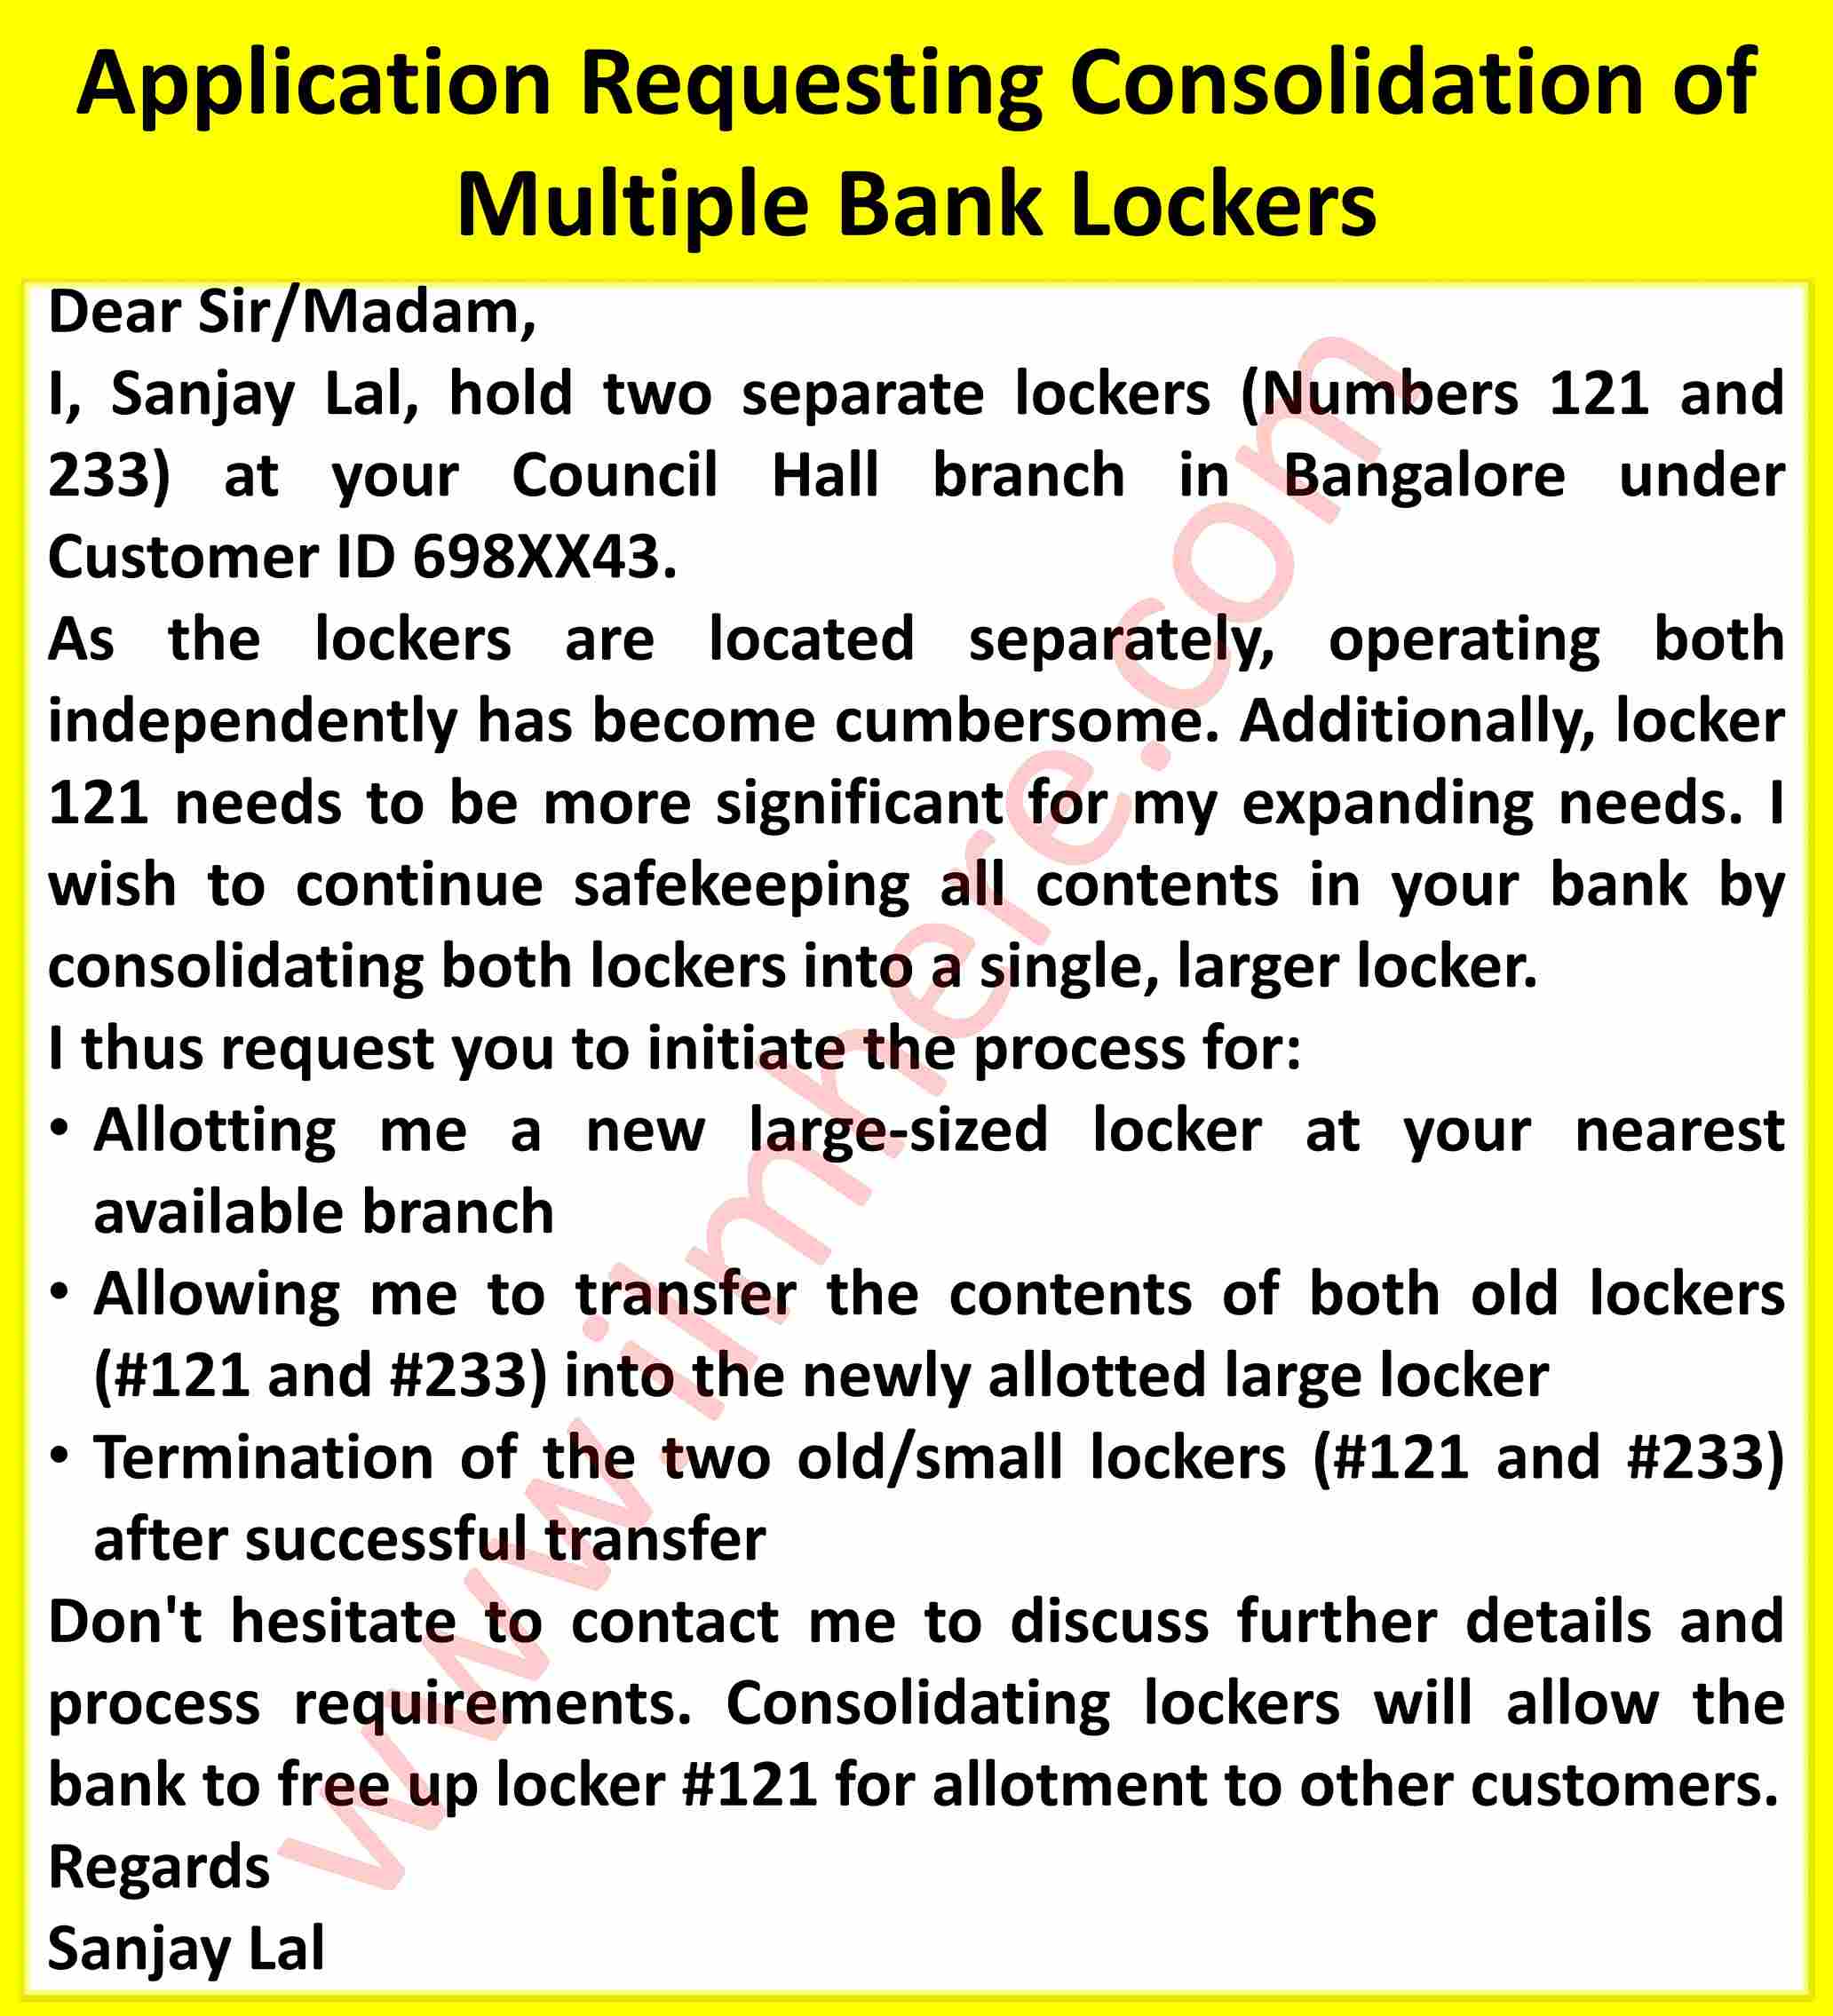 Application Requesting Consolidation of Multiple Bank Lockers